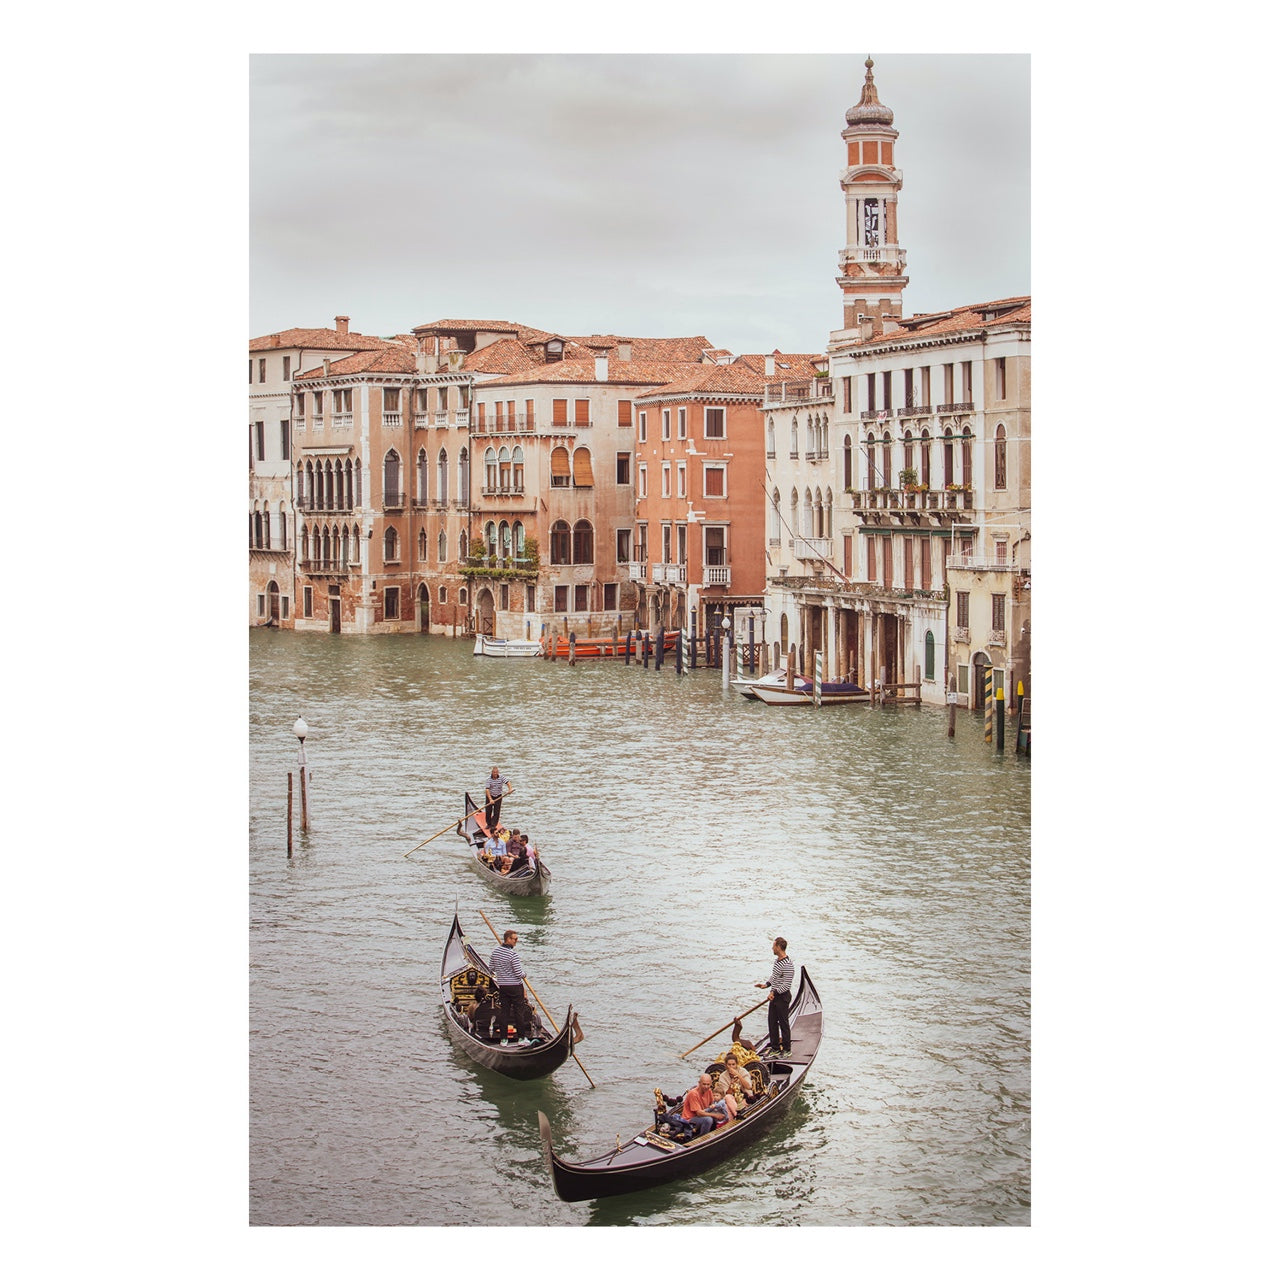 Fine Art Prints - "The Grand Canal" | Italy Photography Print